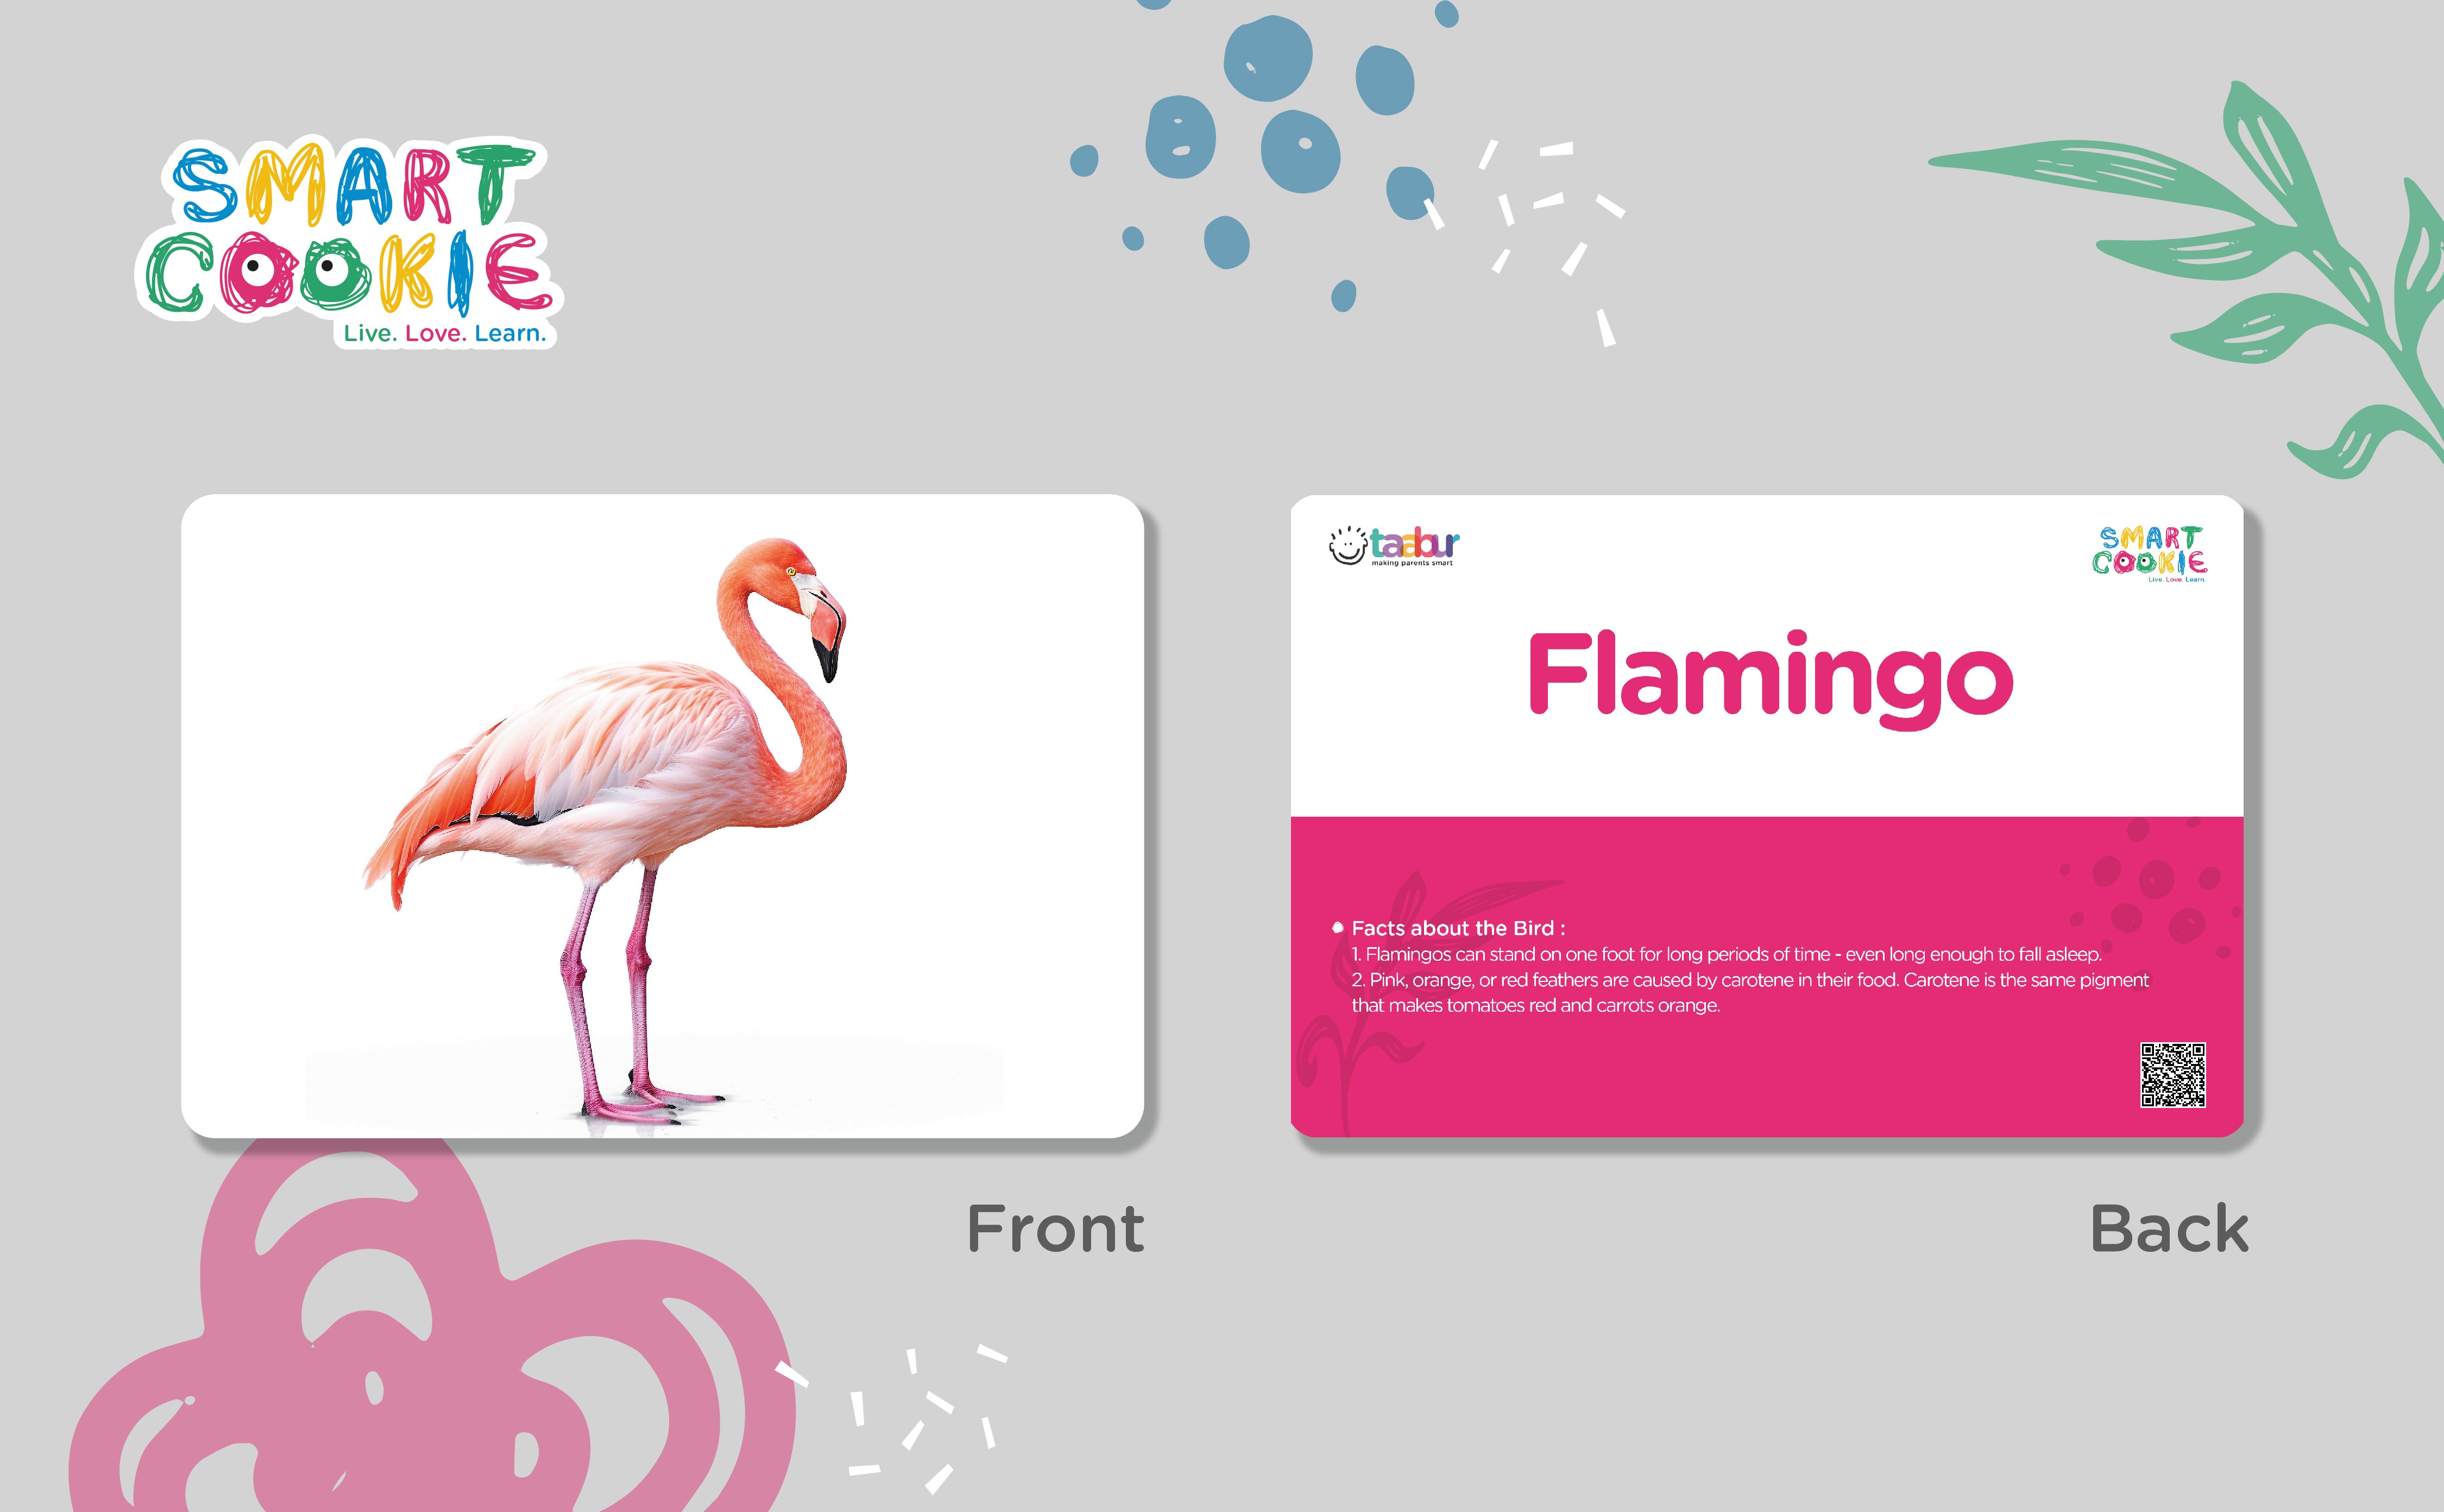 Beautiful Birds - Interactive Flash Cards for Children (20 Cards) - for Kids Aged 2 to 4 Years Old